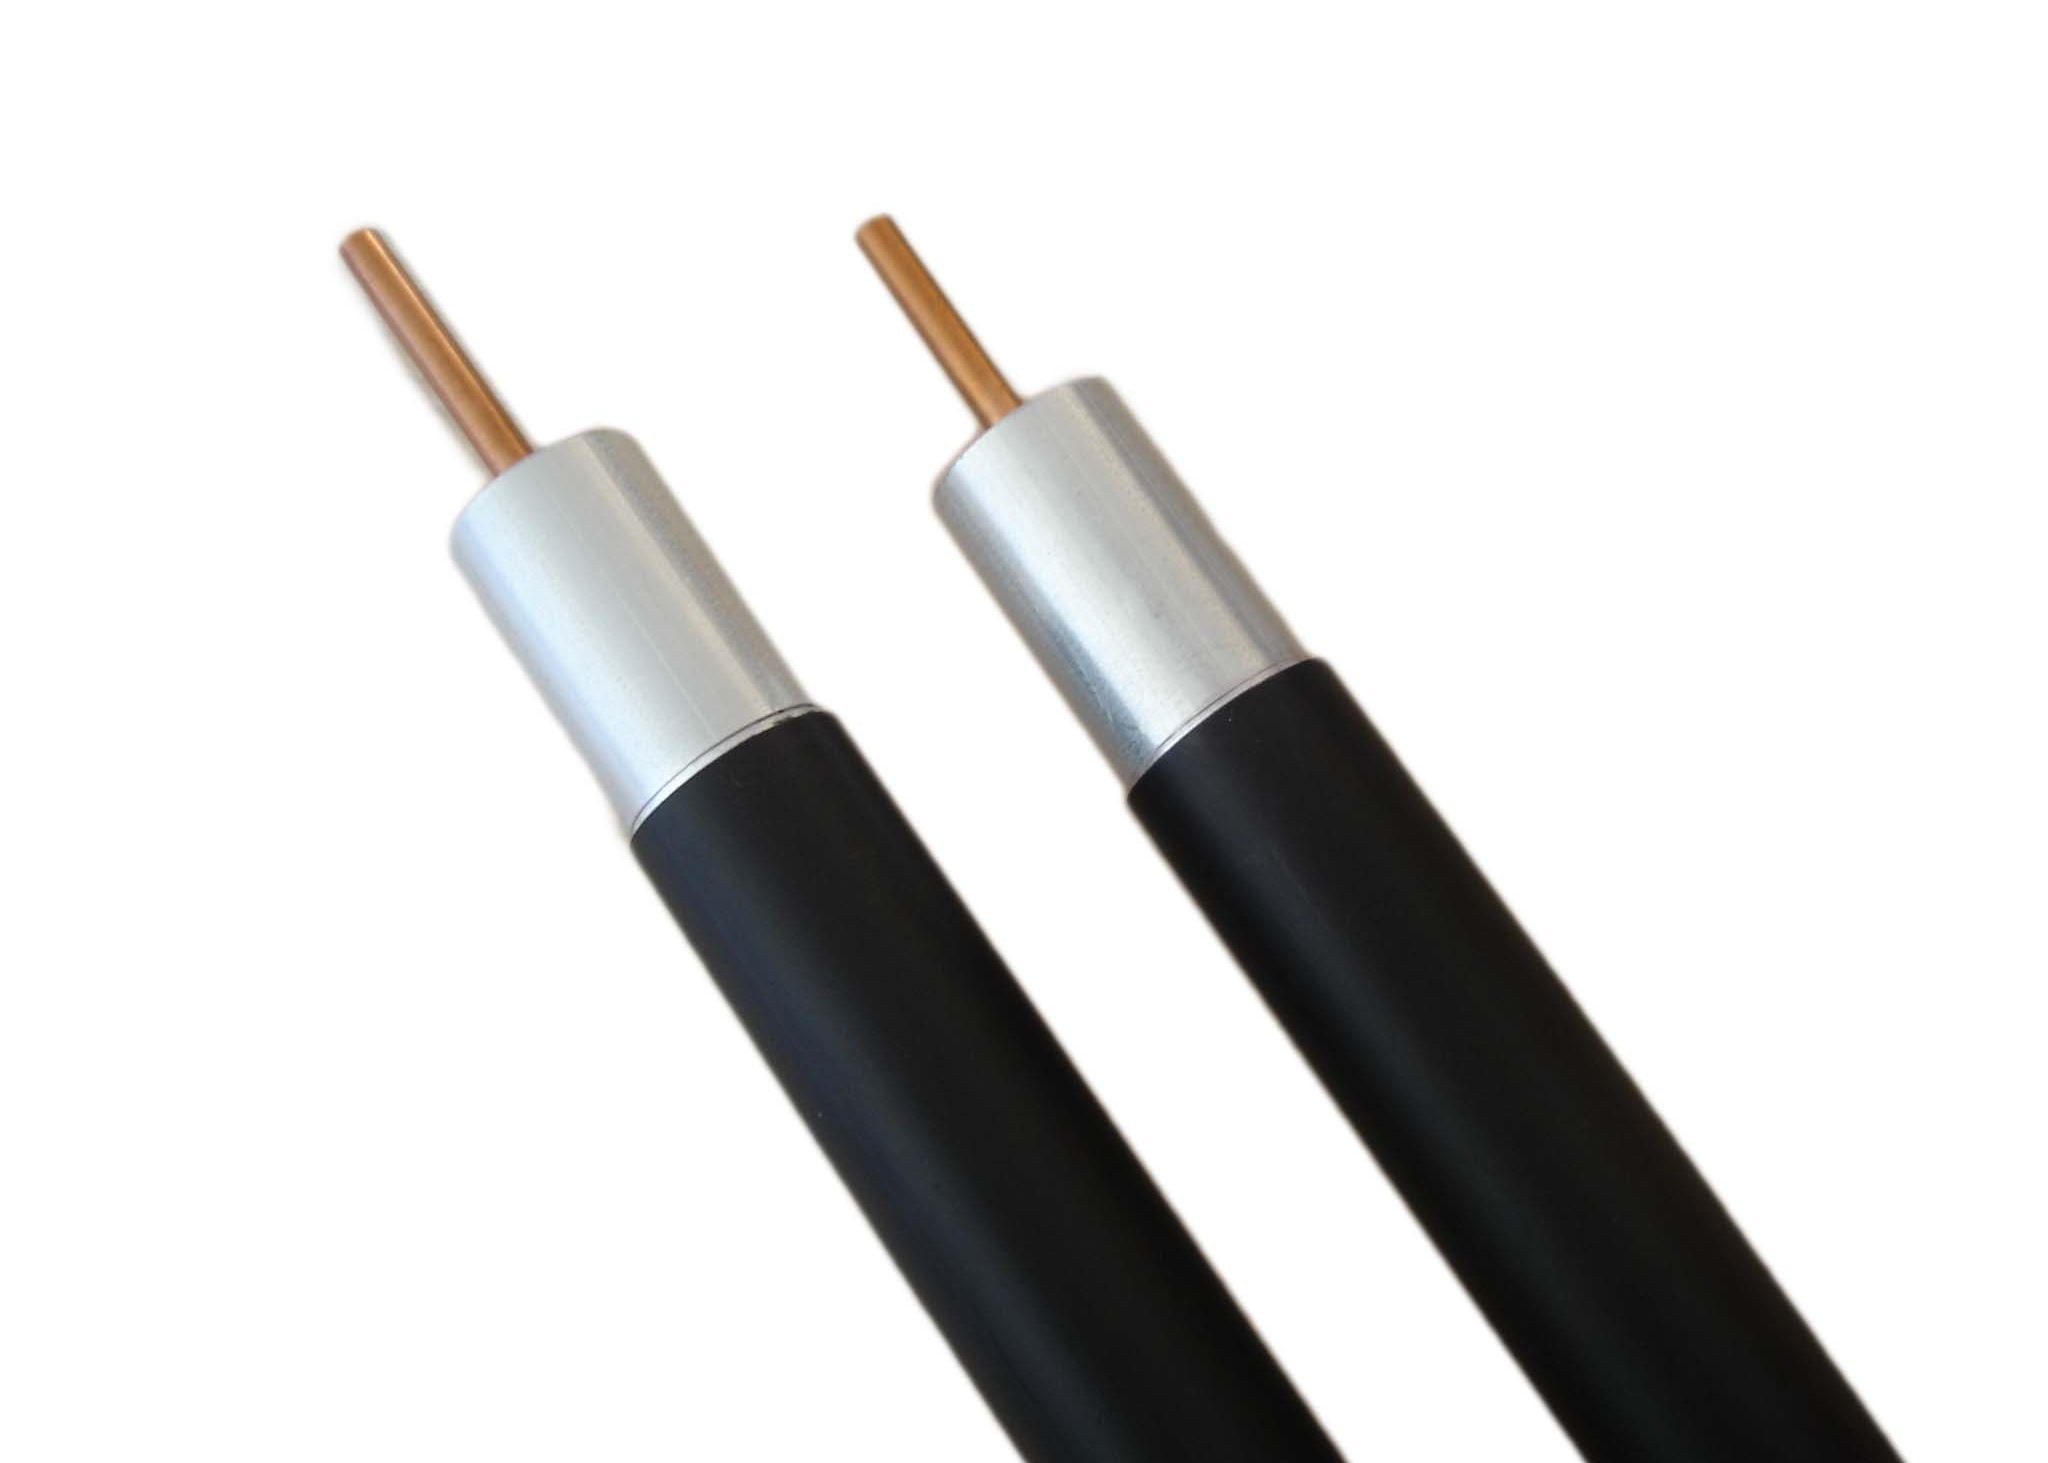  Aluminum Tube Trunk Cable 412JCAM with Zinc Coated Messenger Manufactures